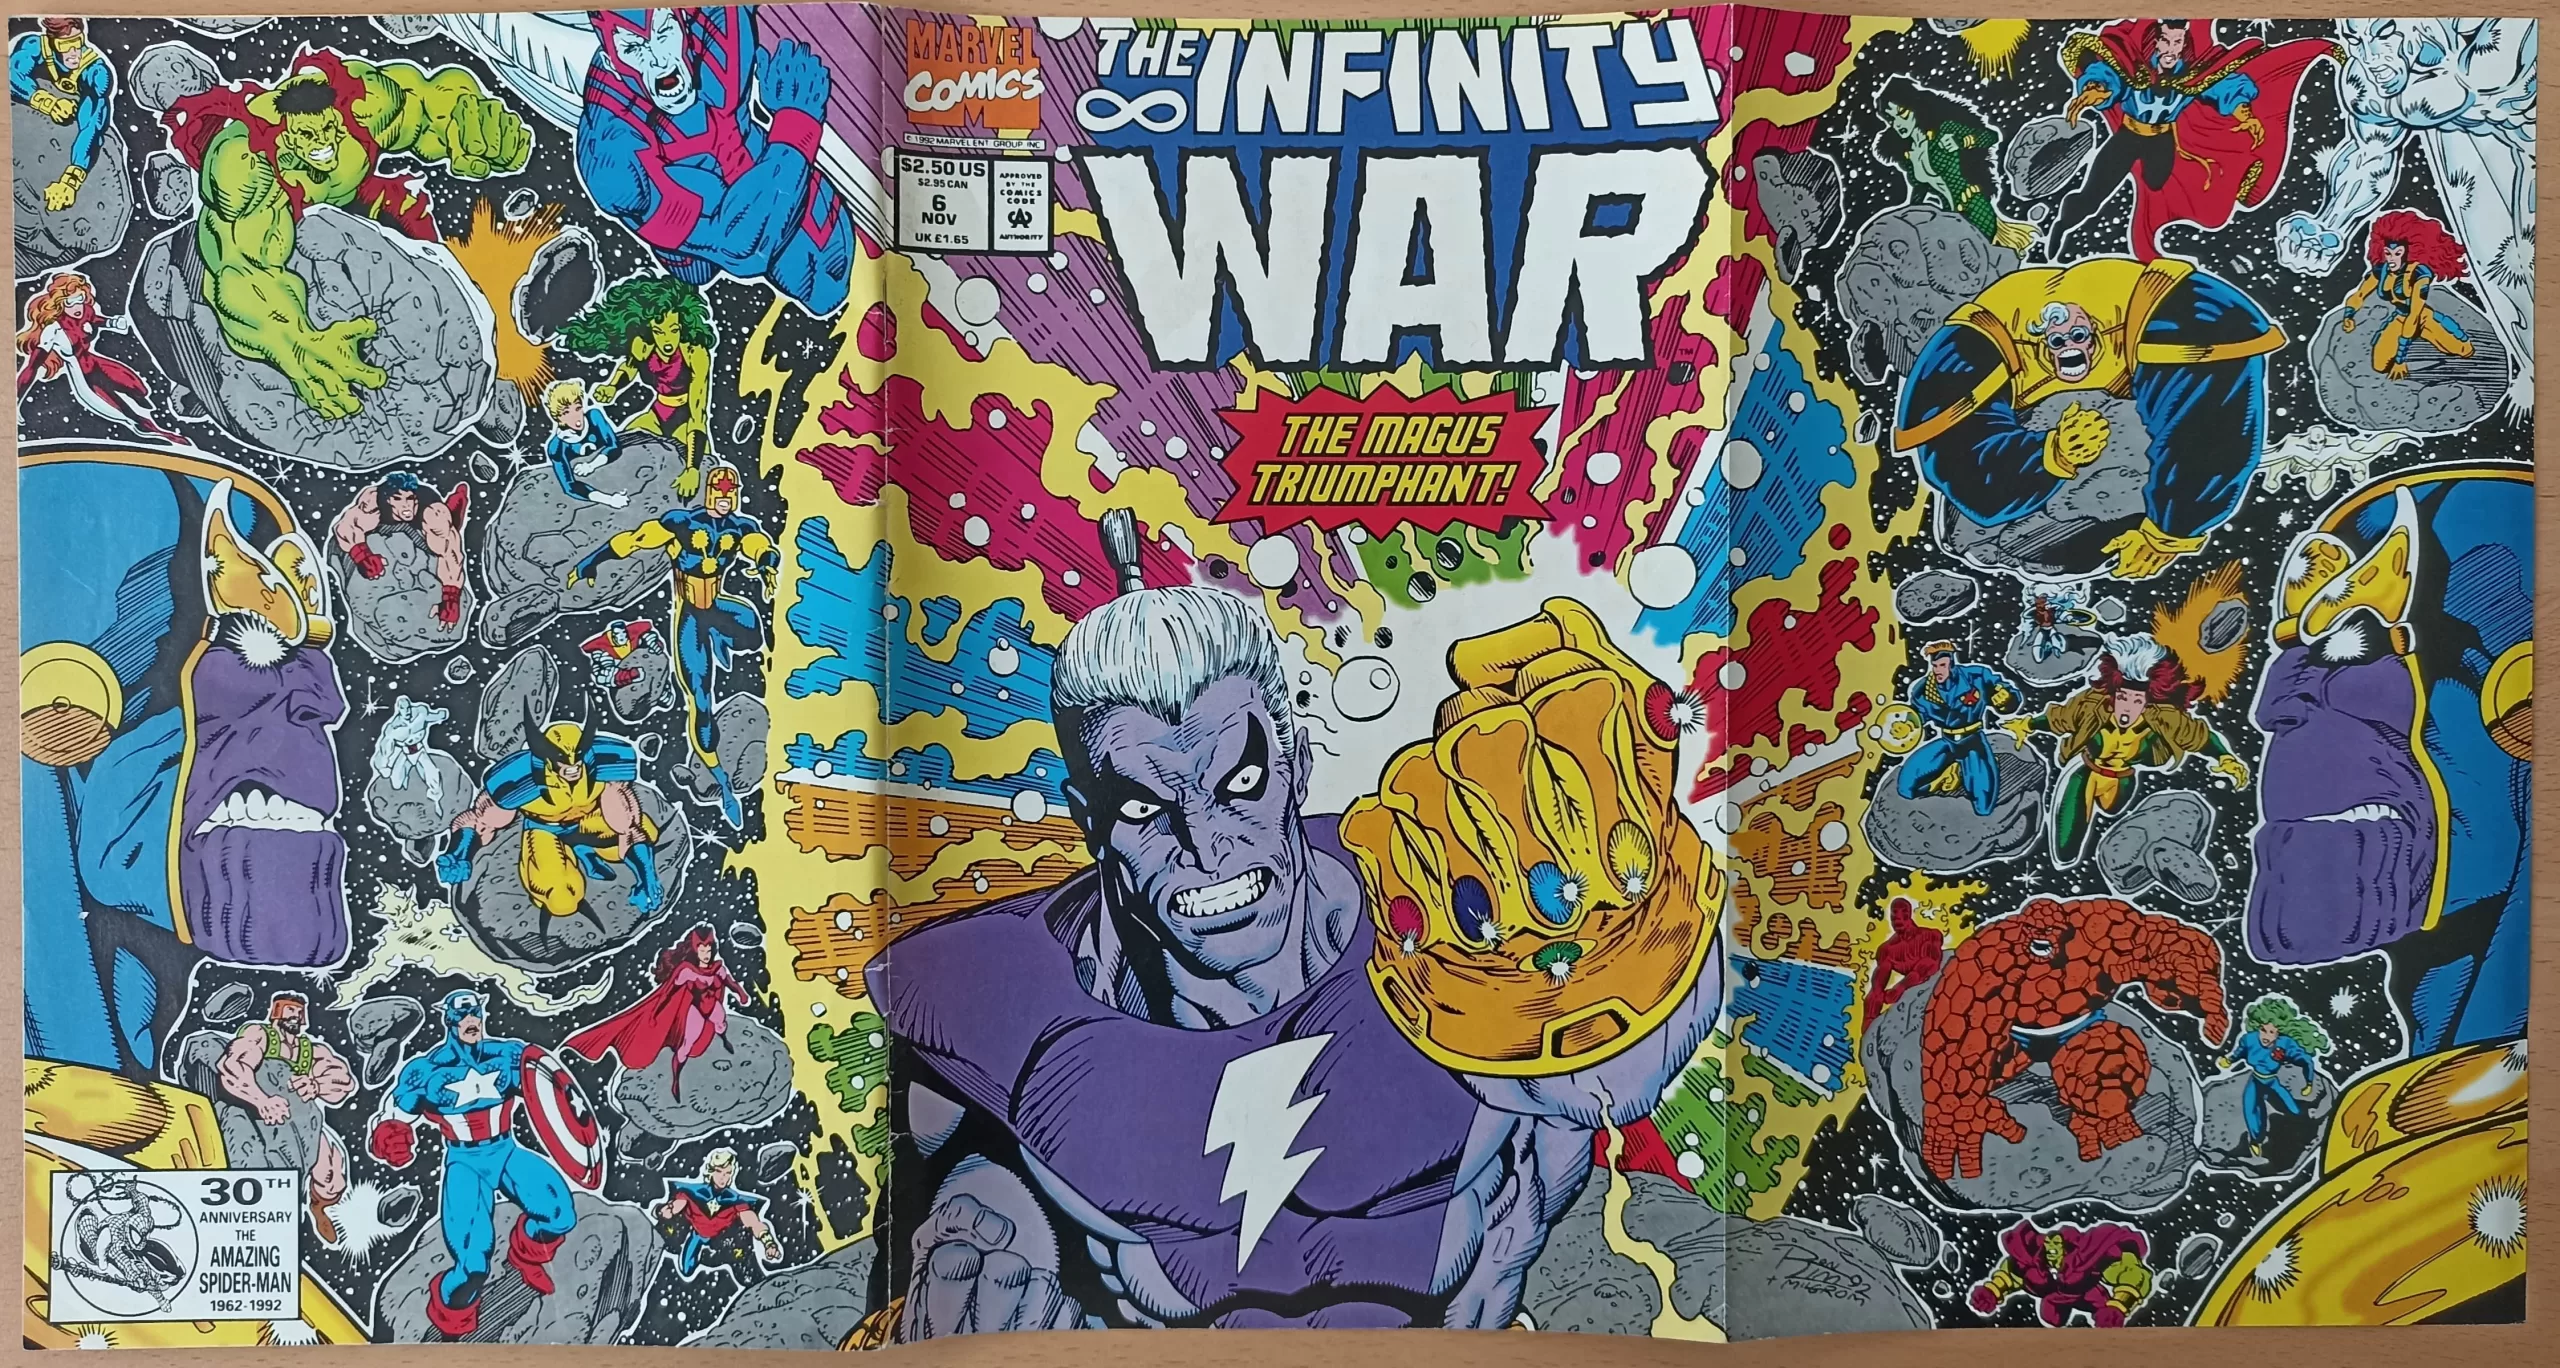 The Infinity War, Issue 6, The Magus Triumphant!